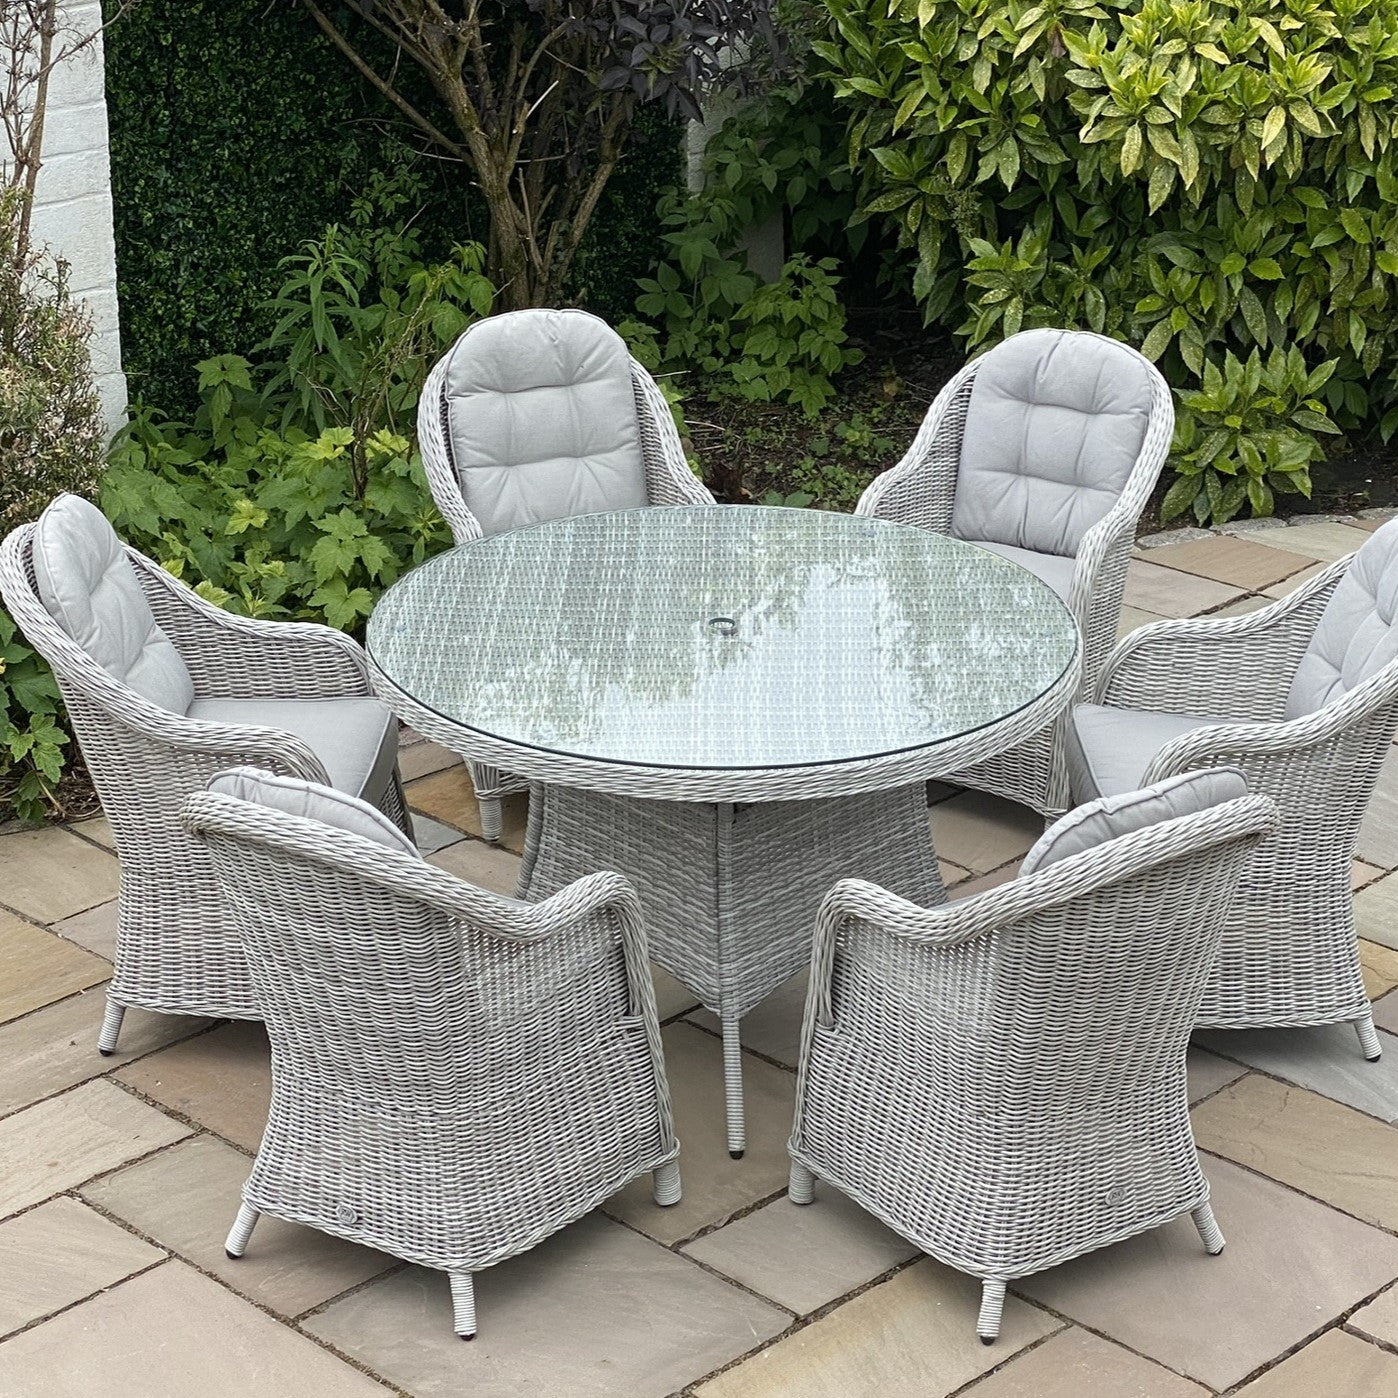 Sepino - 6 Seater Set with Round Table & Lazy Susan (Light Grey)